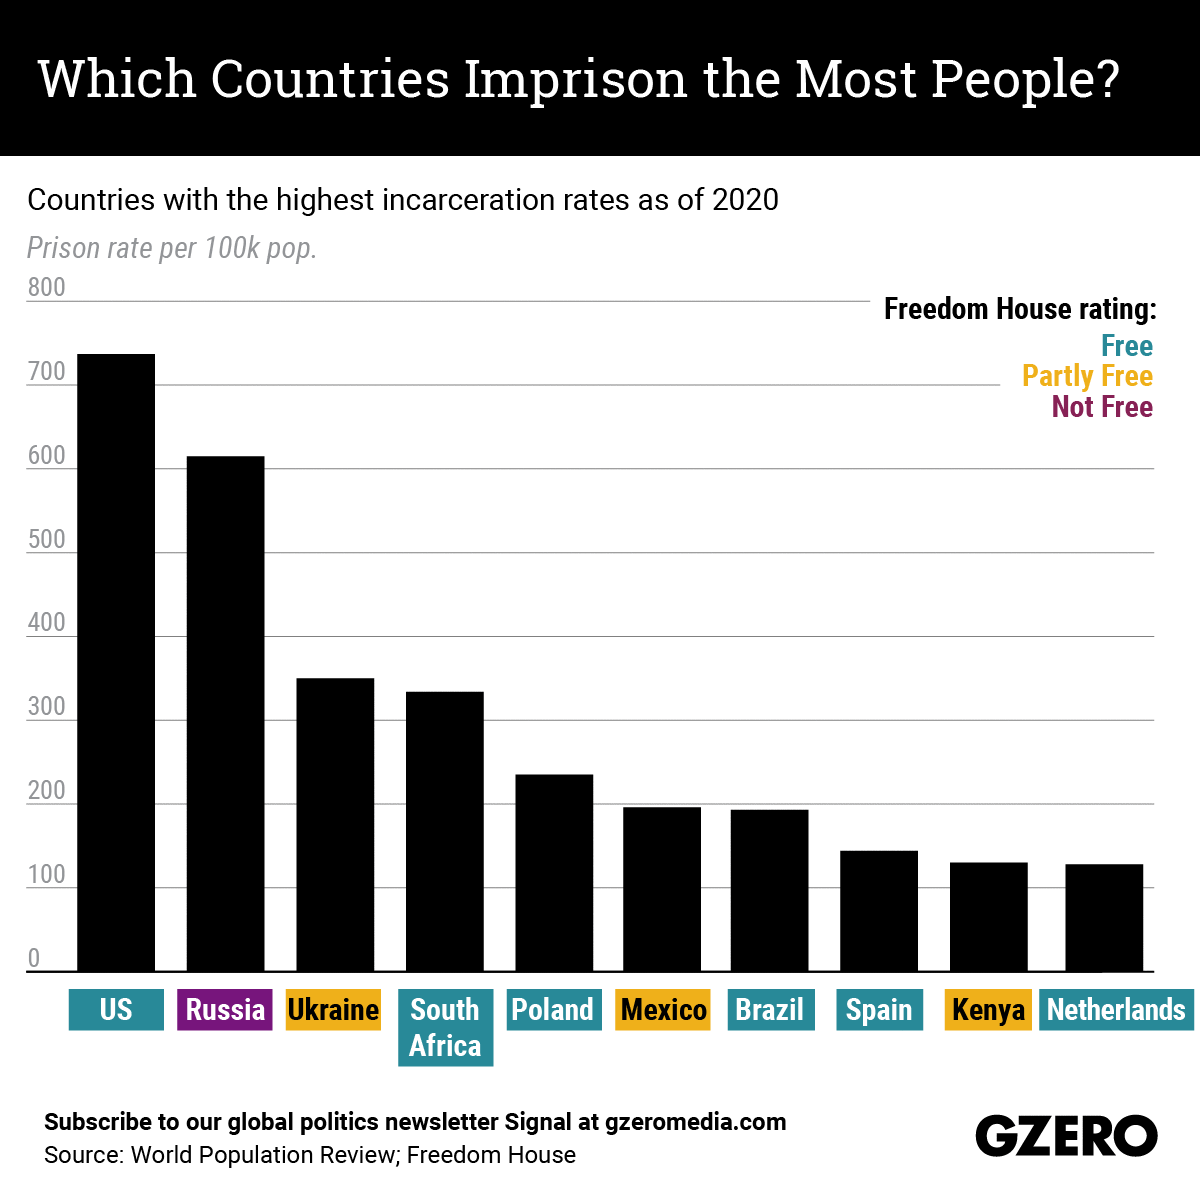 The Graphic Truth: Which countries imprison the most people?